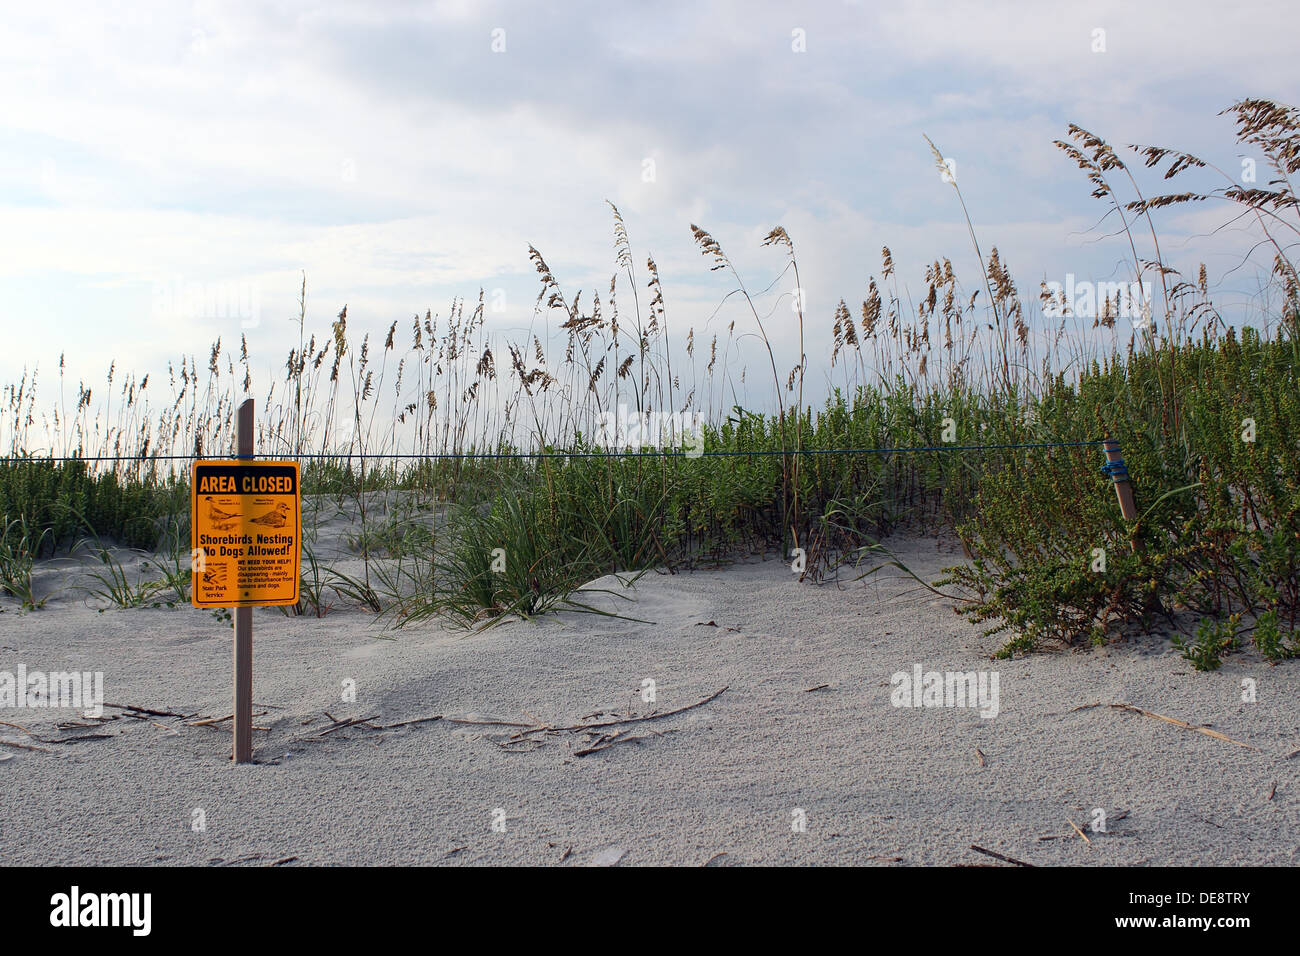 A section of beach dune closed off to protect nesting birds. Stock Photo